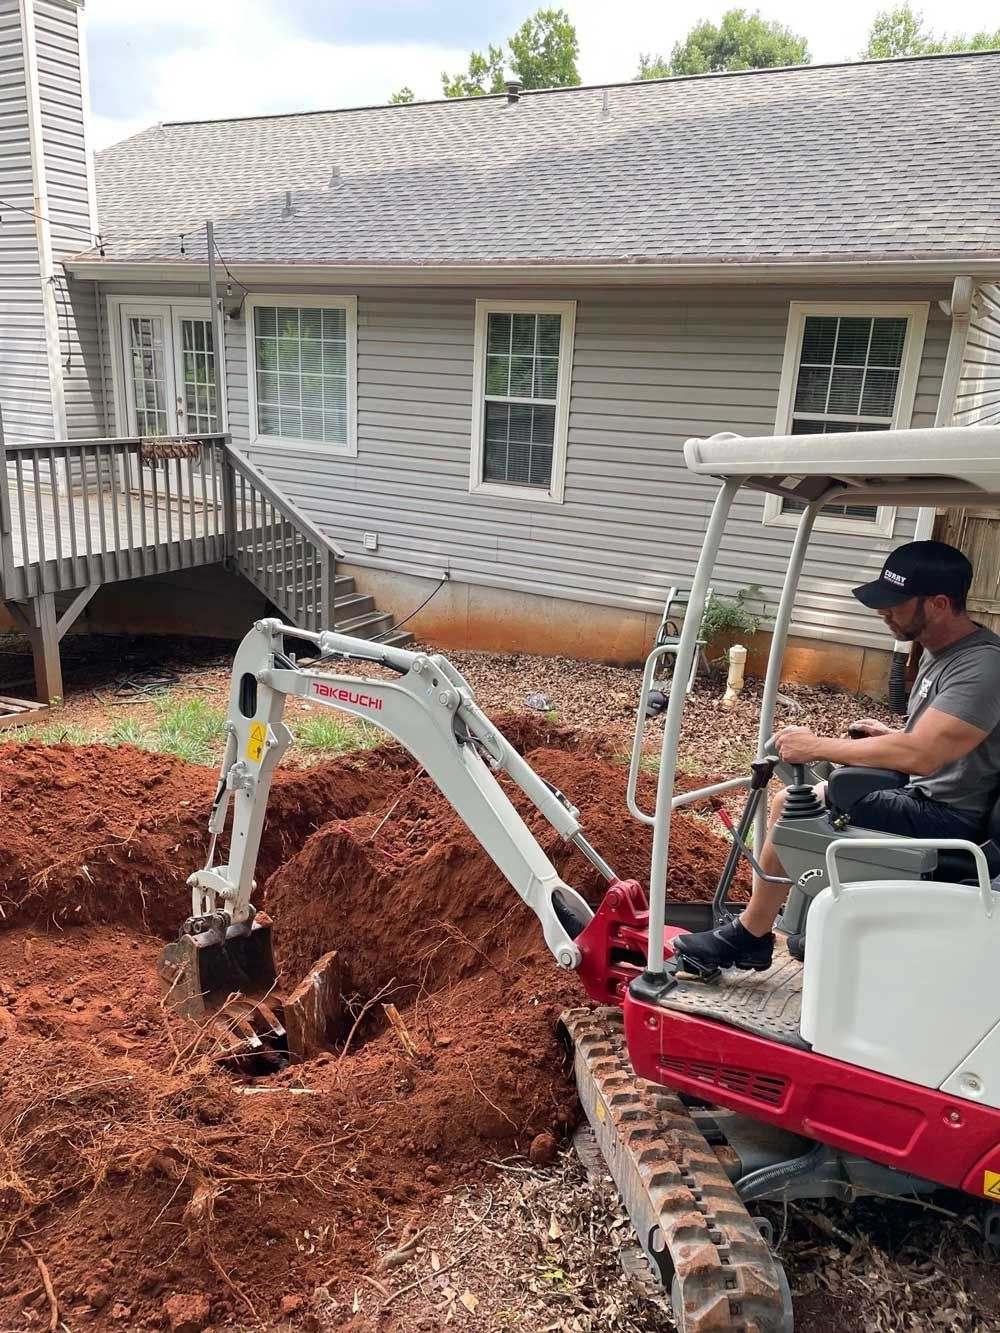 Septic pumping at a home in Hoschton, GA